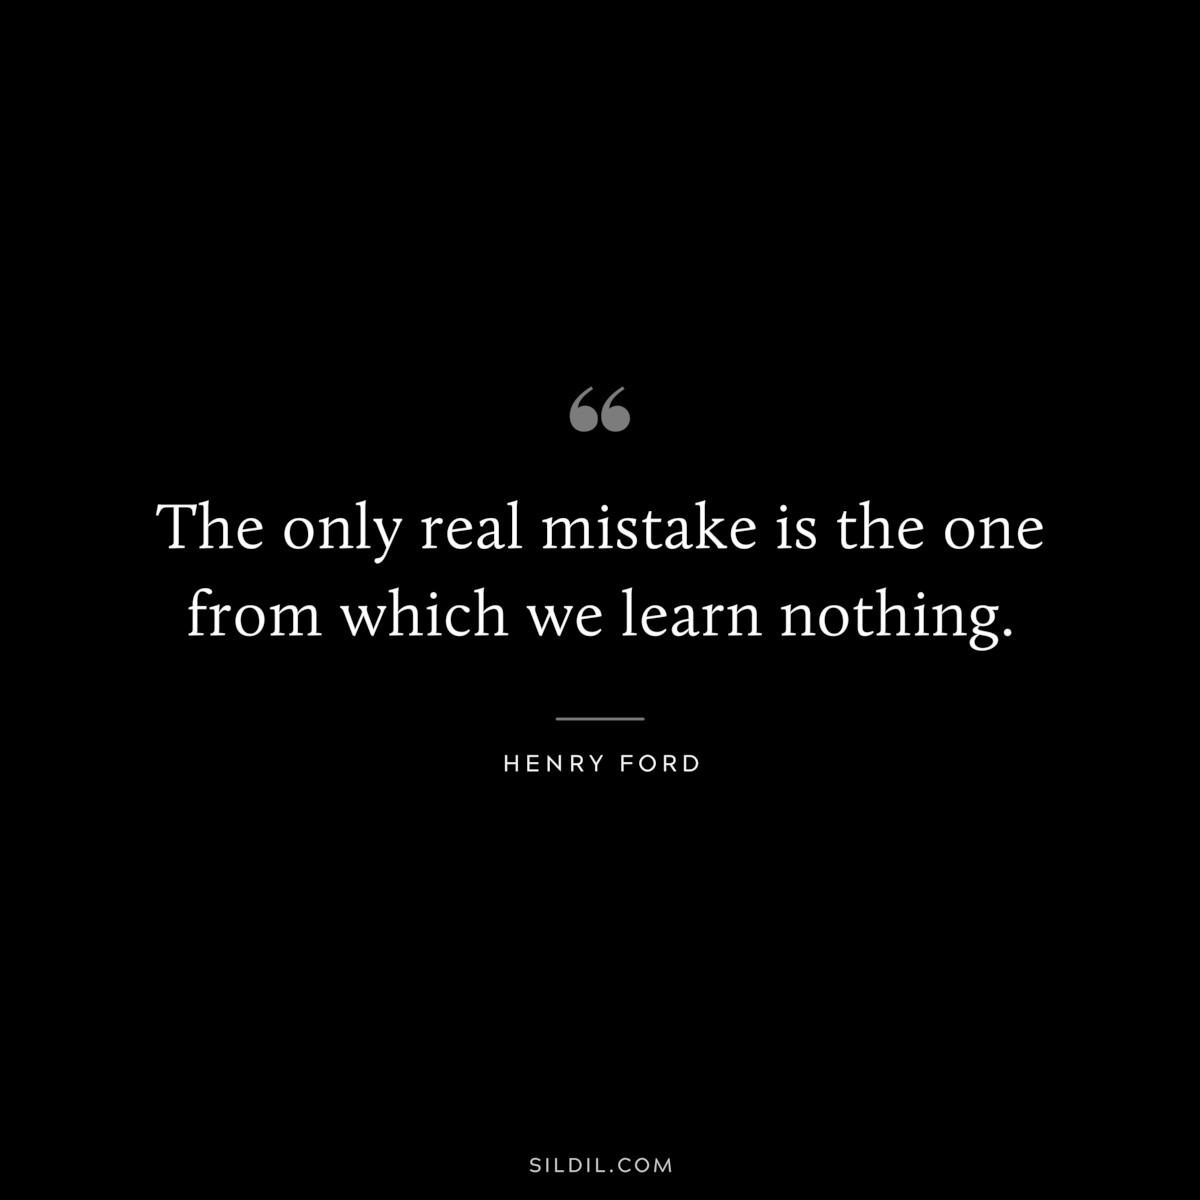 The only real mistake is the one from which we learn nothing. ― Henry Ford